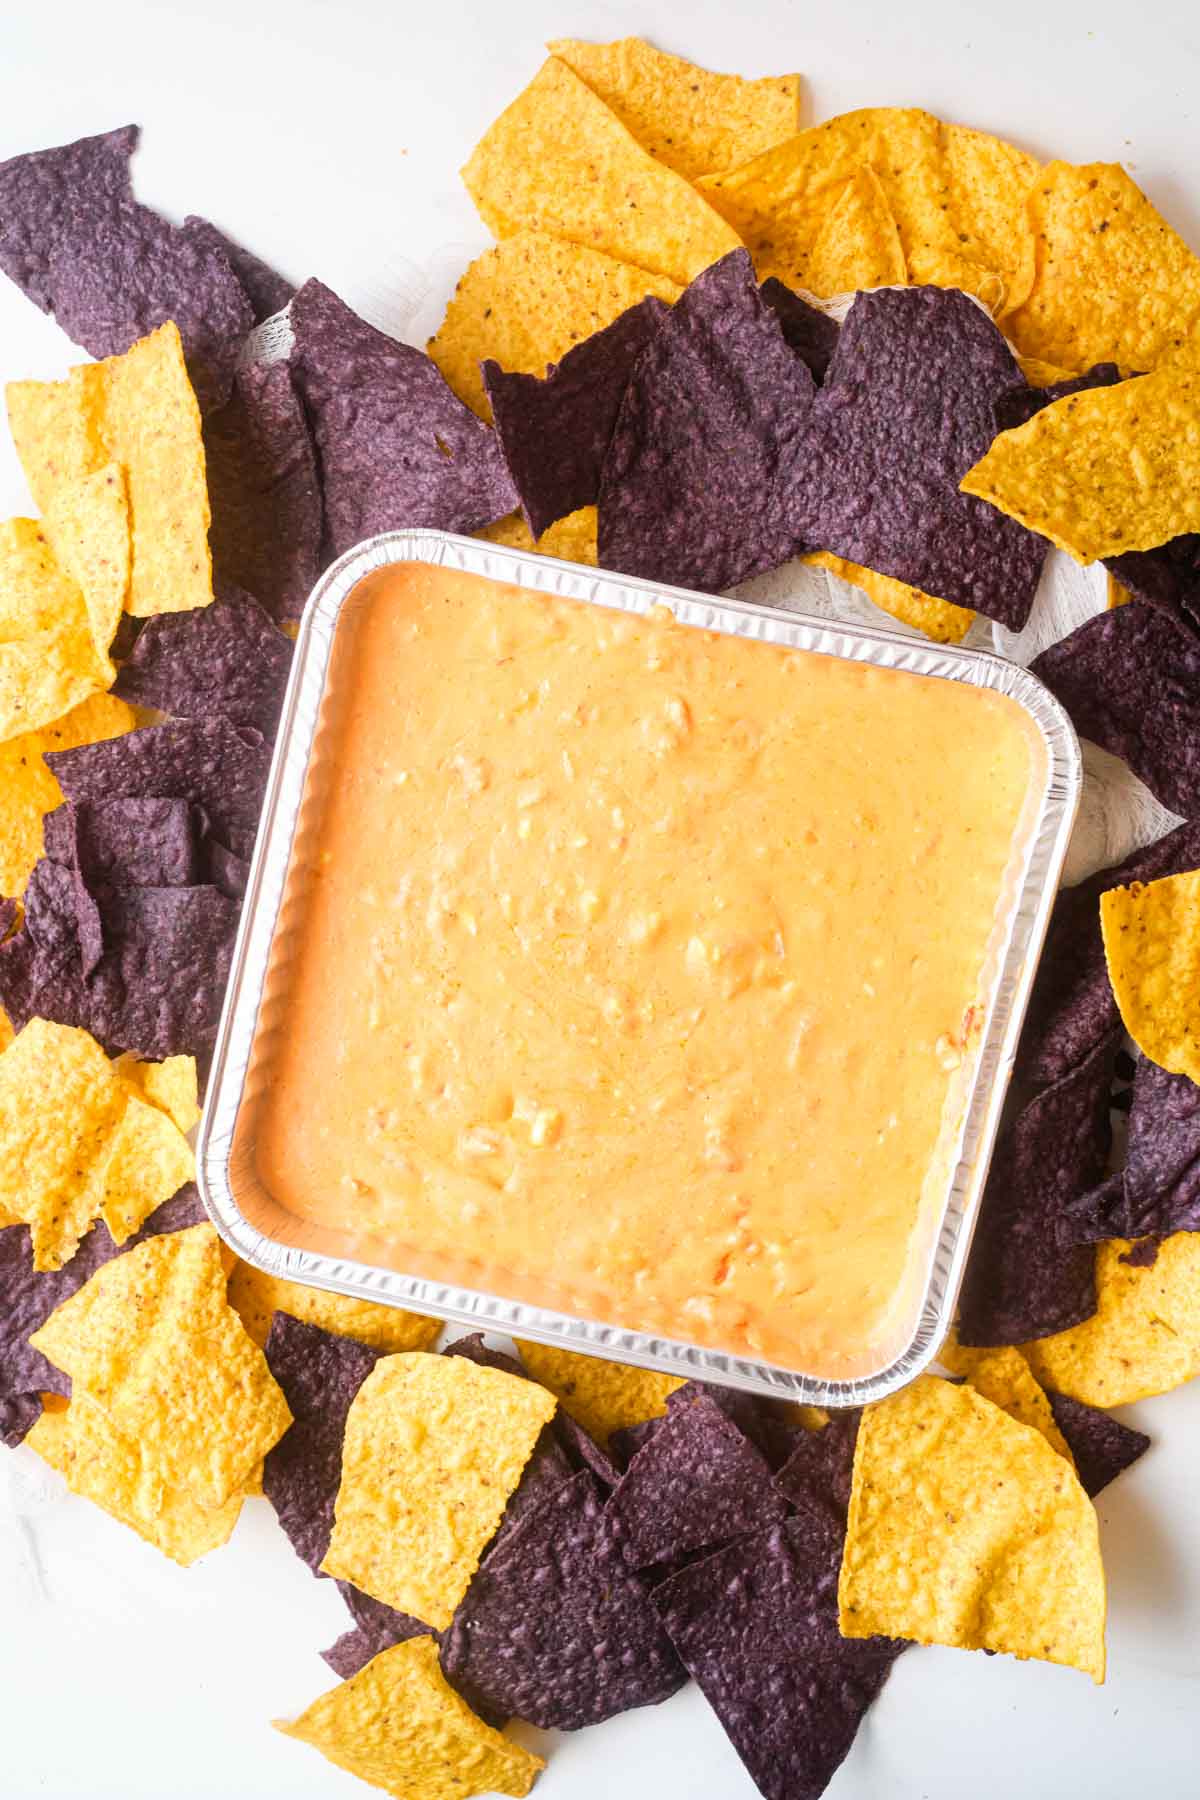 the completed air fryer mexican cheese dip surrounded by tortilla chips